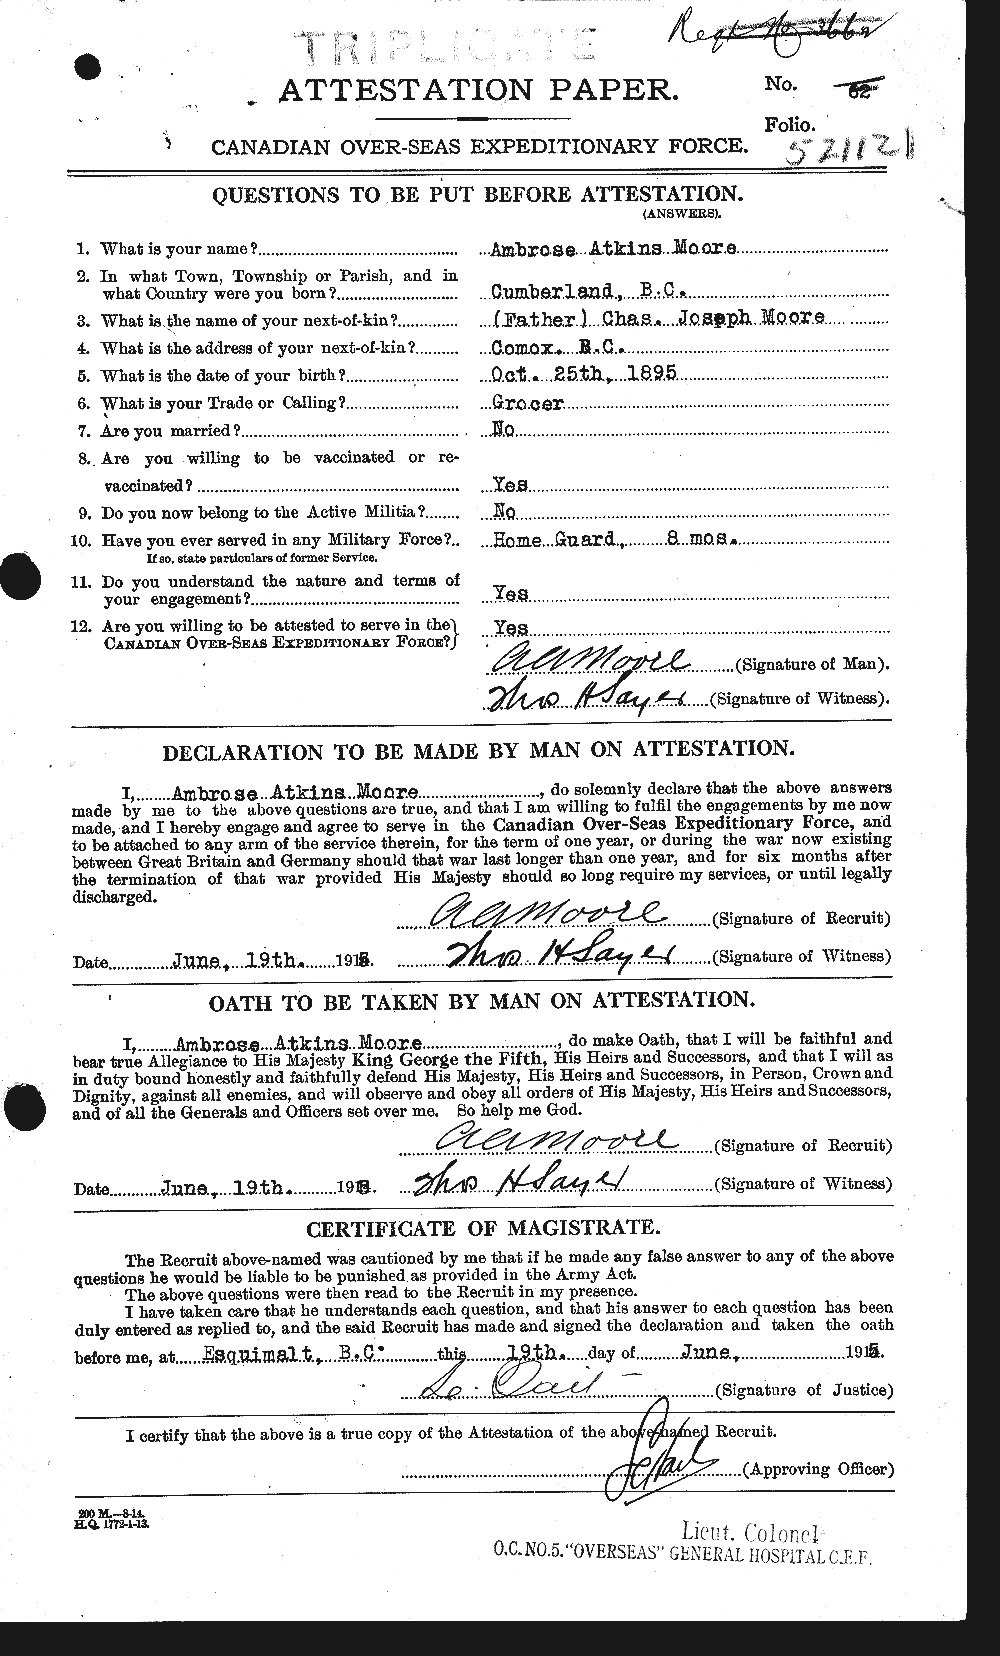 Personnel Records of the First World War - CEF 506401a